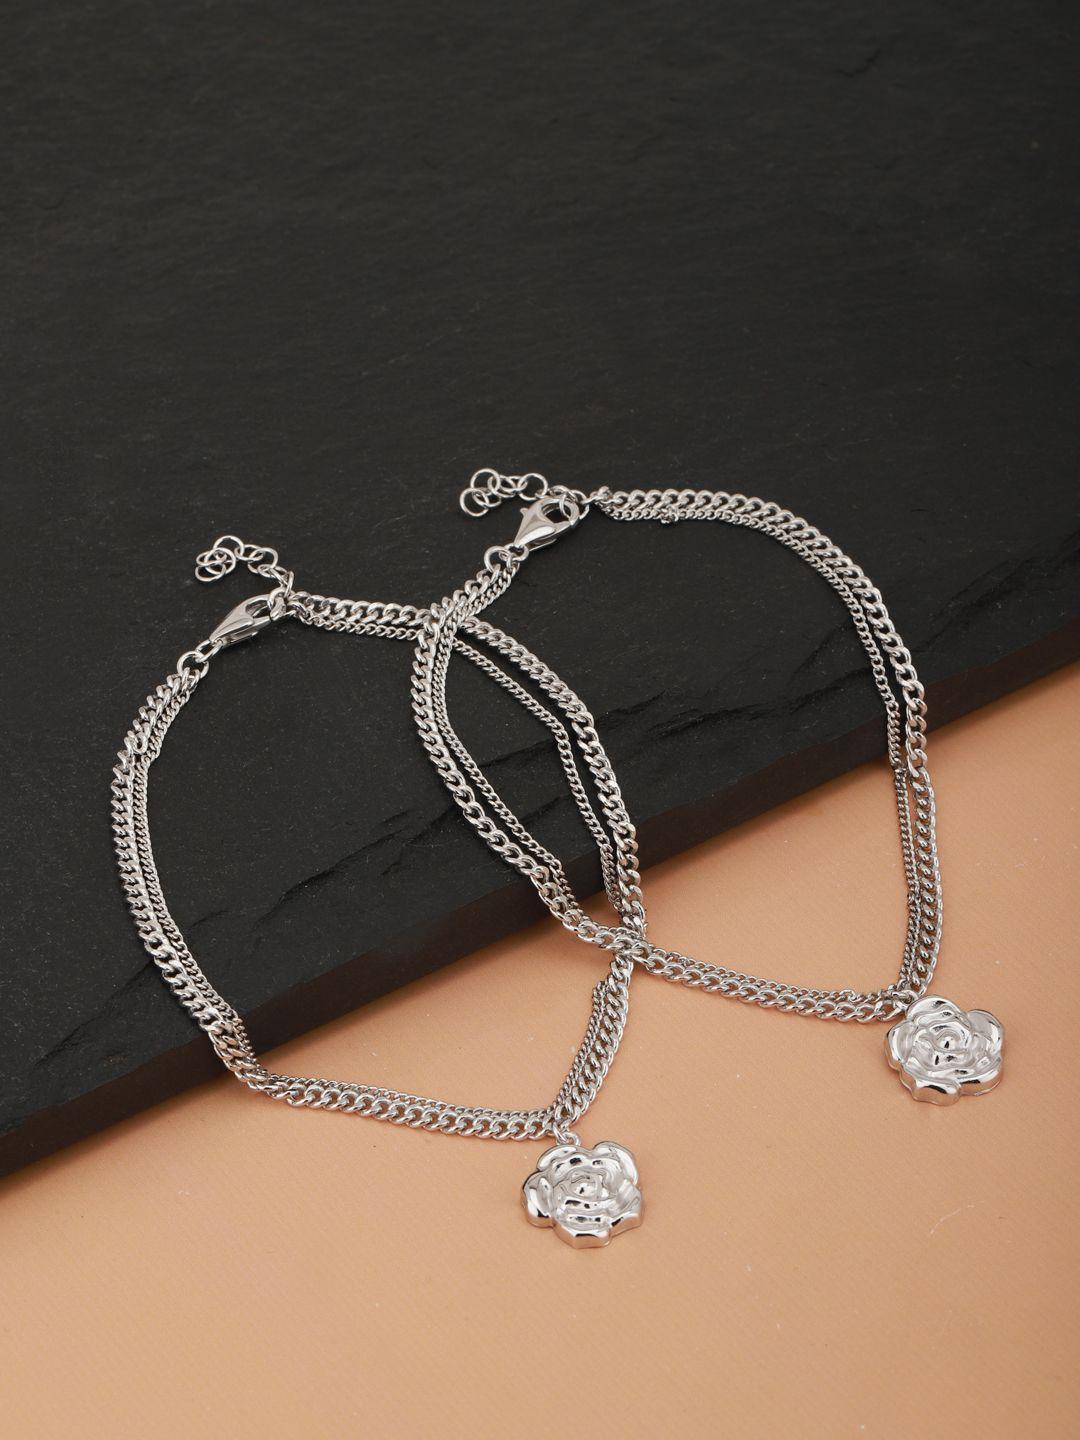 carlton-london-set-of-2-silver-toned-rhodium-plated-floral-shaped-layered-anklets